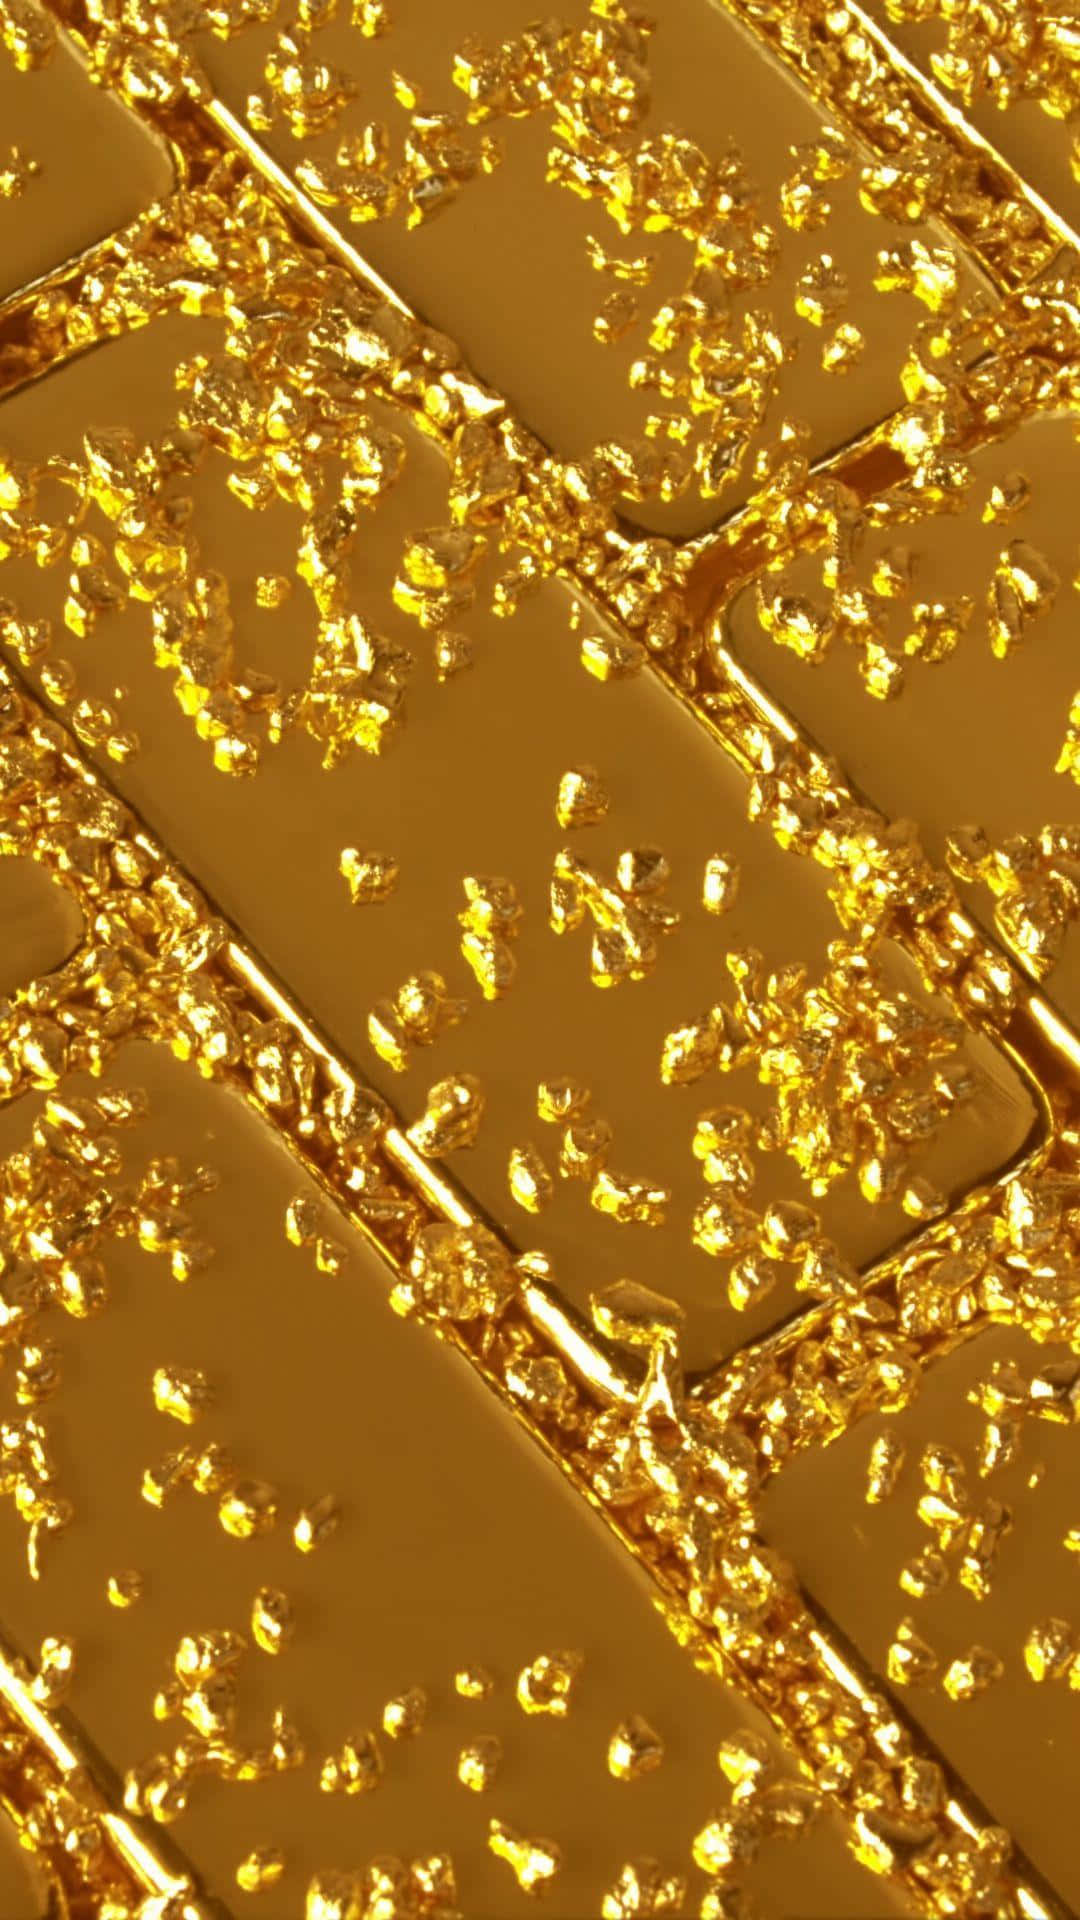 Unbox A Stunning Gold Iphone And Keep The Gold-themed Glamour Going.